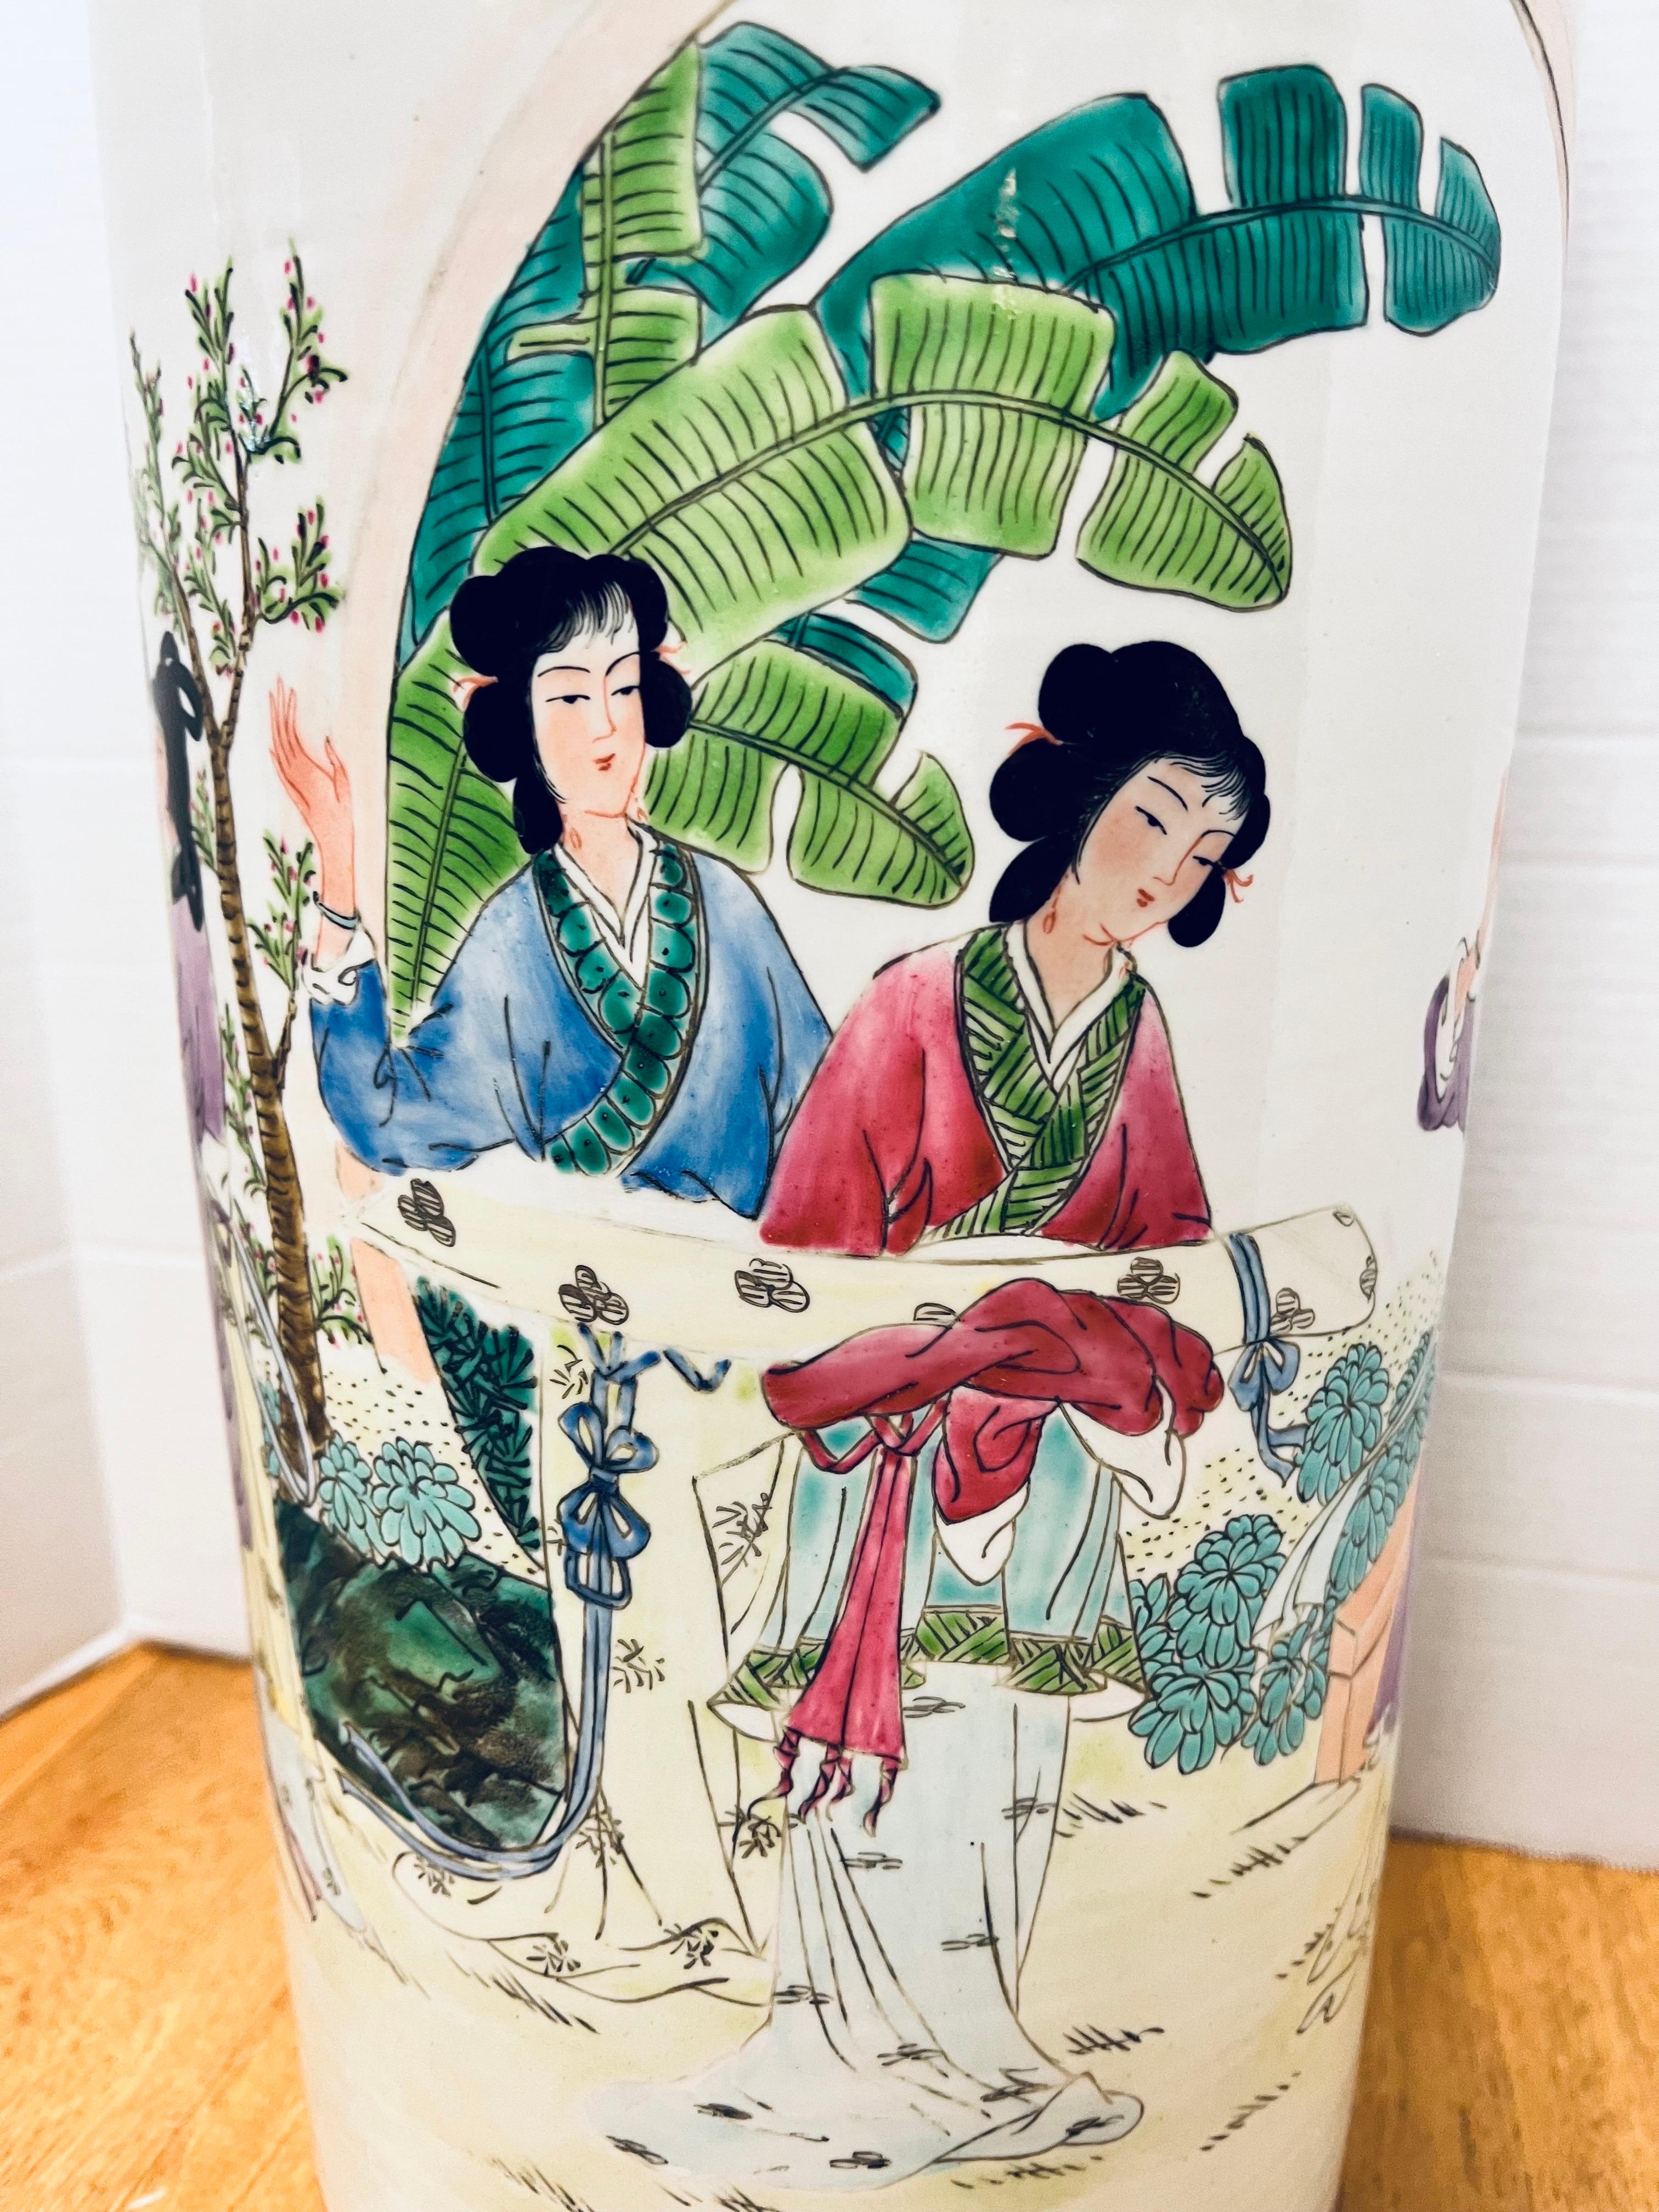 Stunning tall Chinese porcelain umbrella stand with colorful hand painted scenery all around. Signed with Chinese characters. No hallmarks present at bottom.